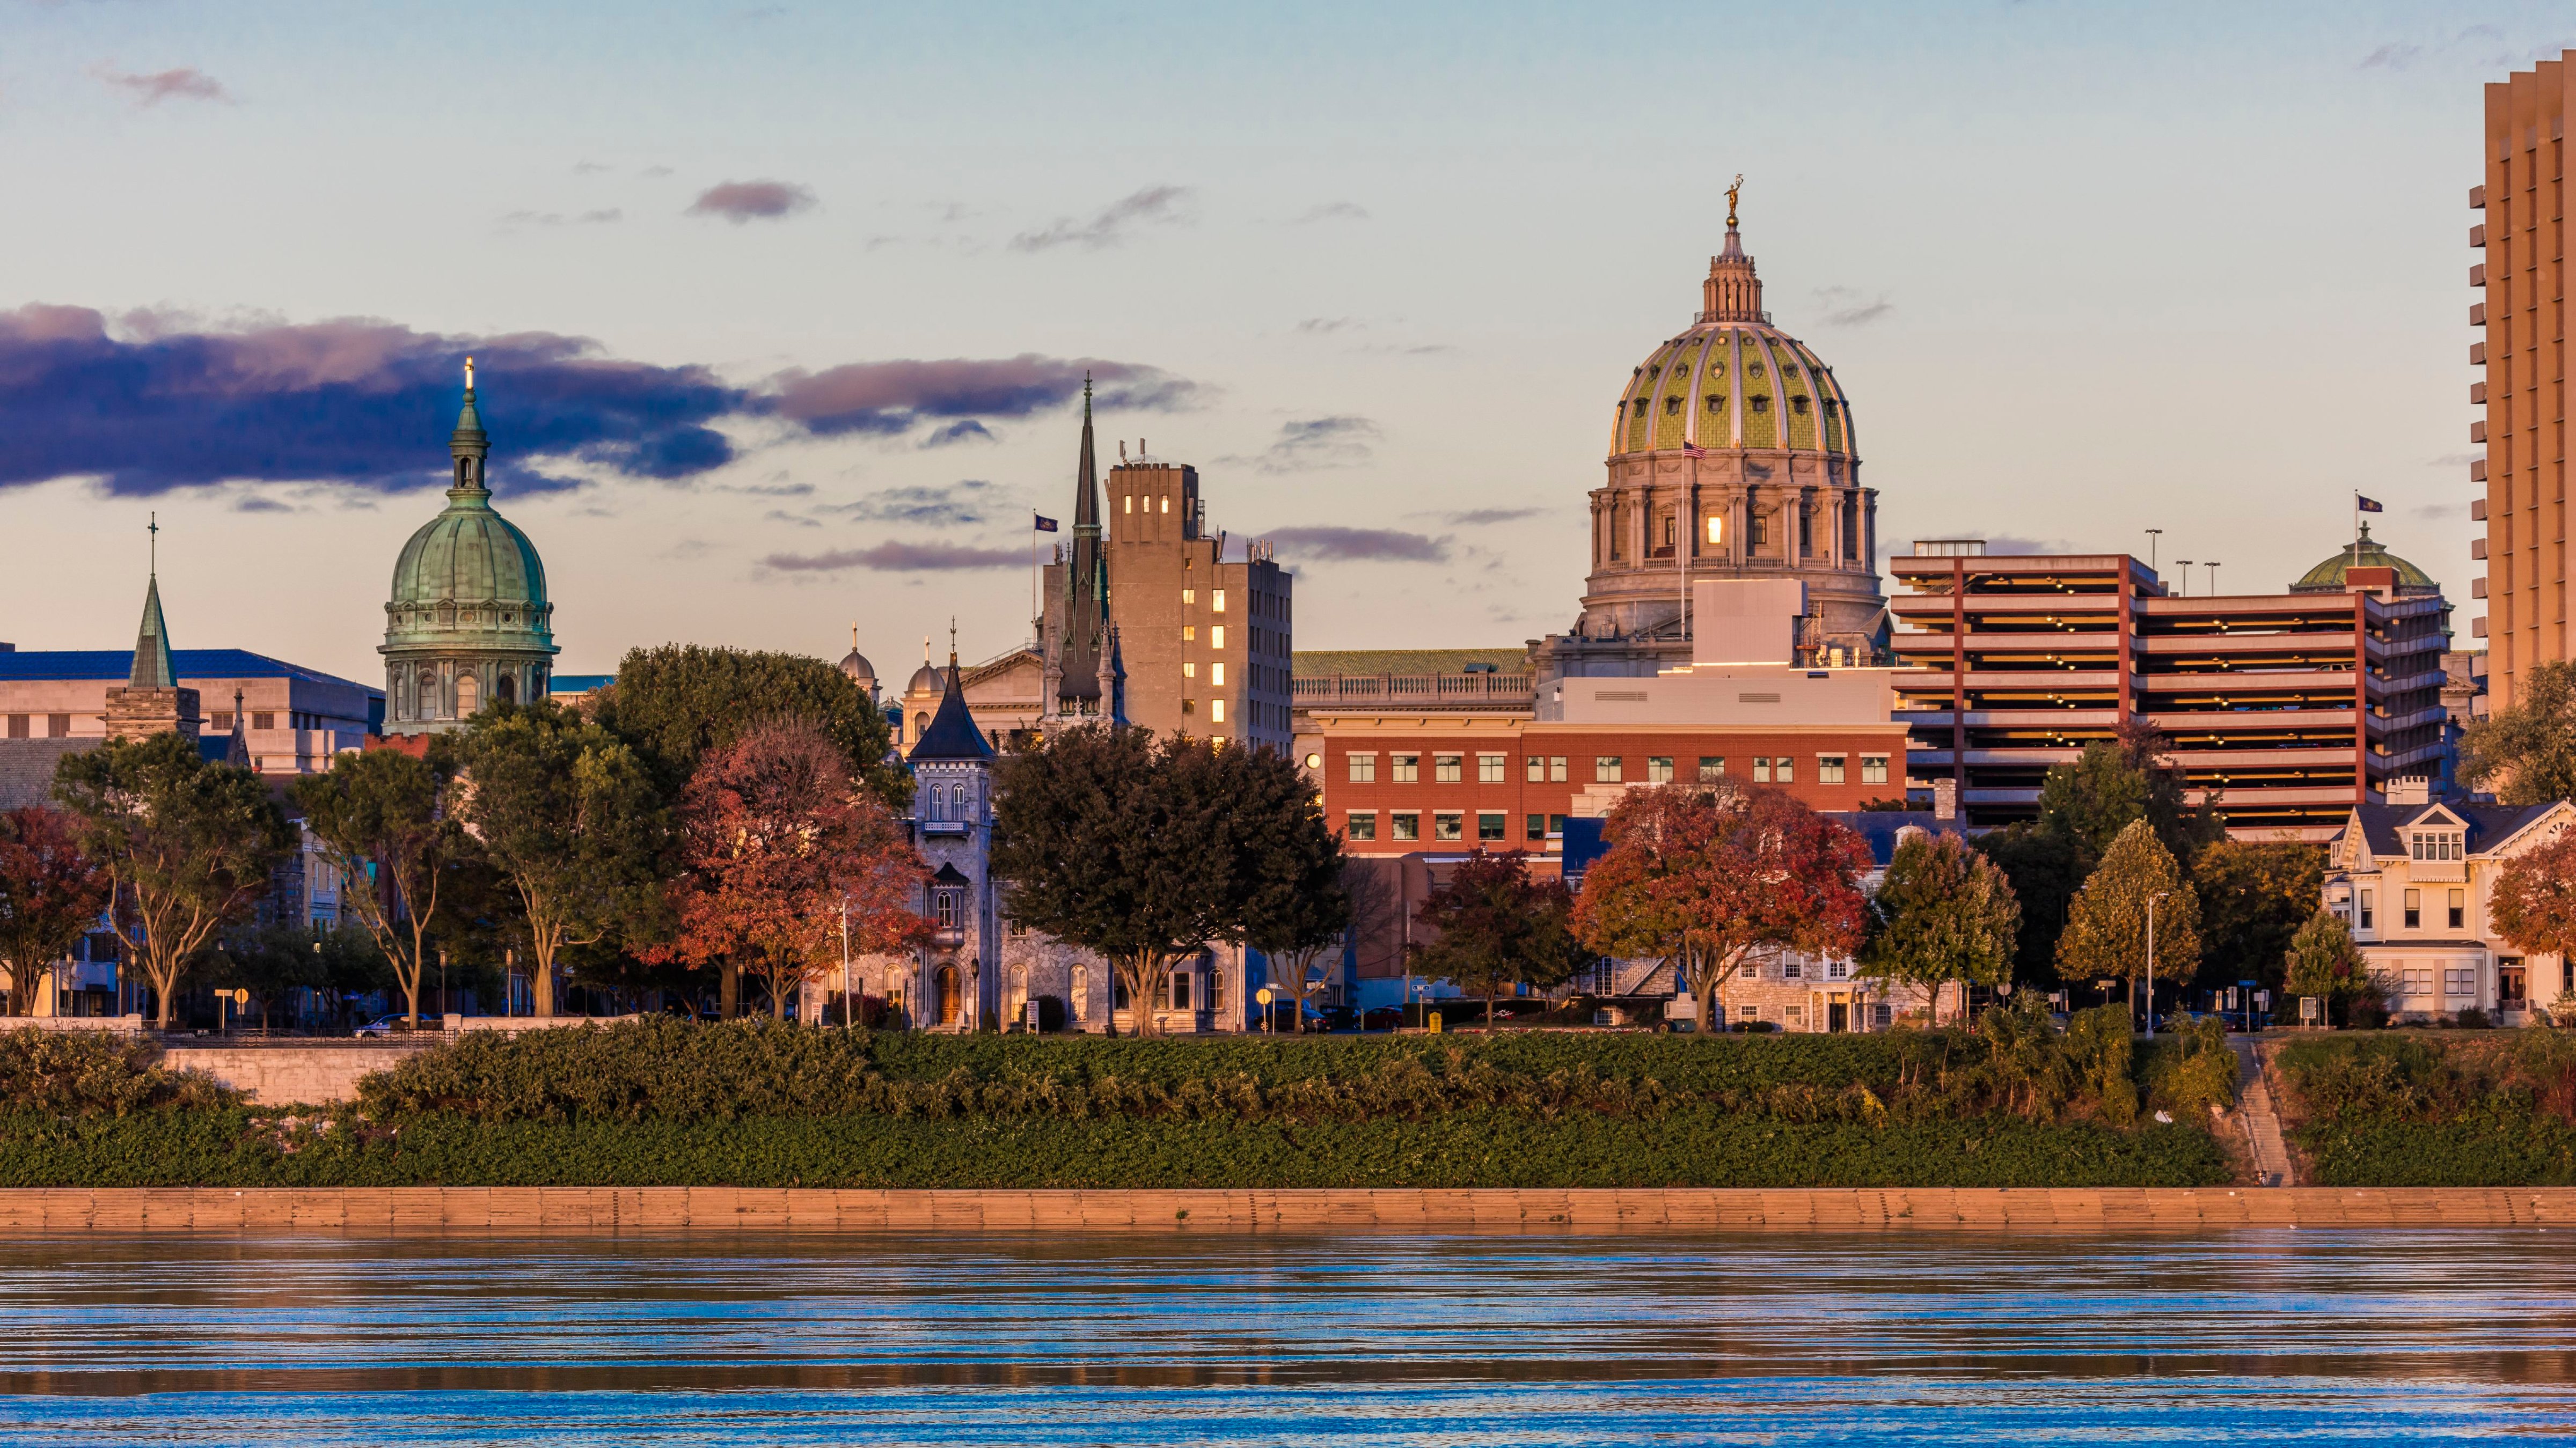 Harrisburg, Pennsylvania, City skyline and State Capitol shot at dusk from Susquehanna River, PA. (Joe Sohm/Visions of America--UIG via Getty Images) (Joe Sohm/Visions of America&mdash;UIG via Getty Images)